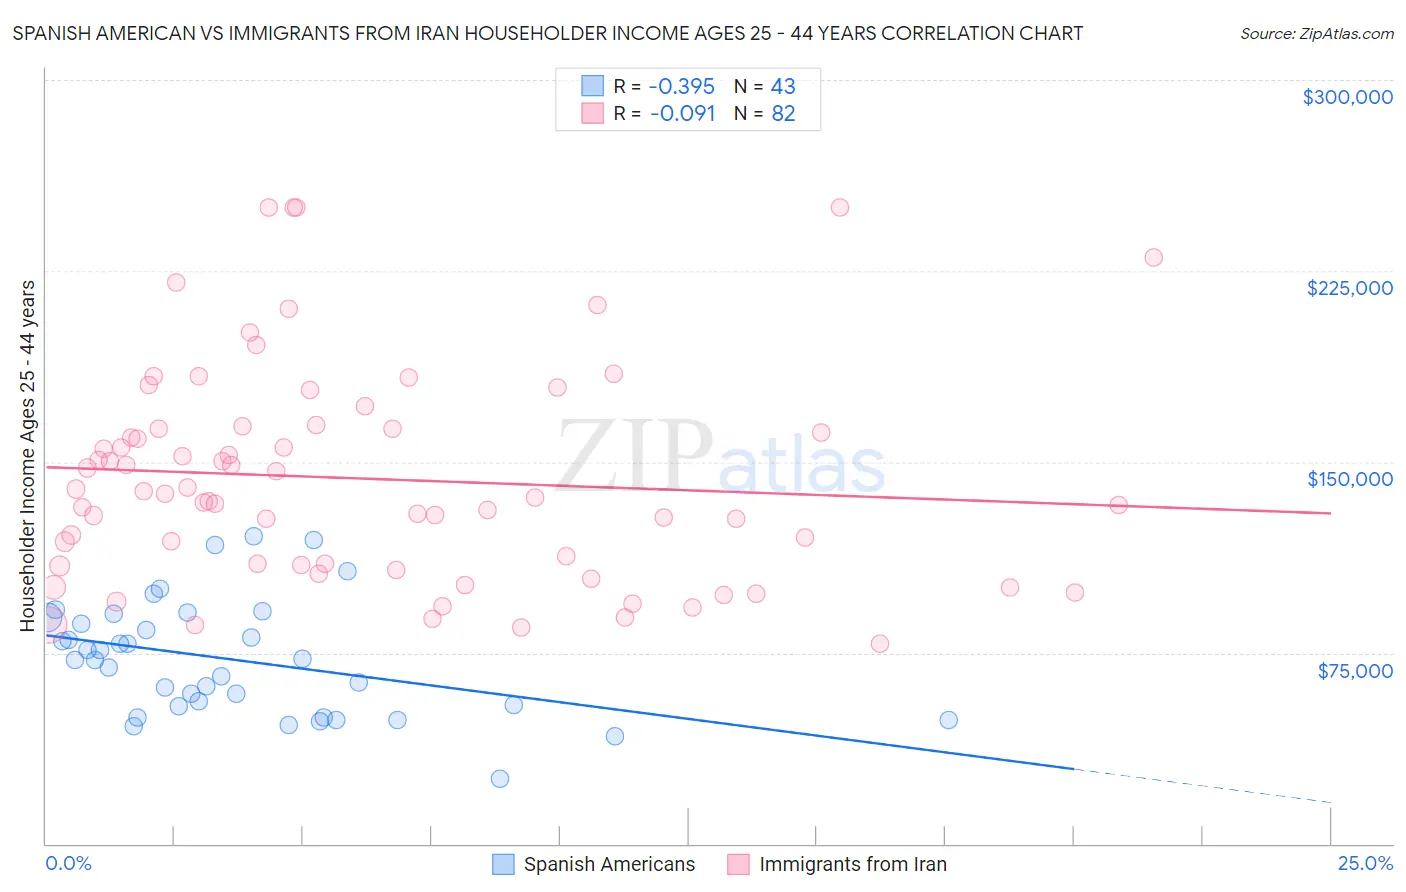 Spanish American vs Immigrants from Iran Householder Income Ages 25 - 44 years